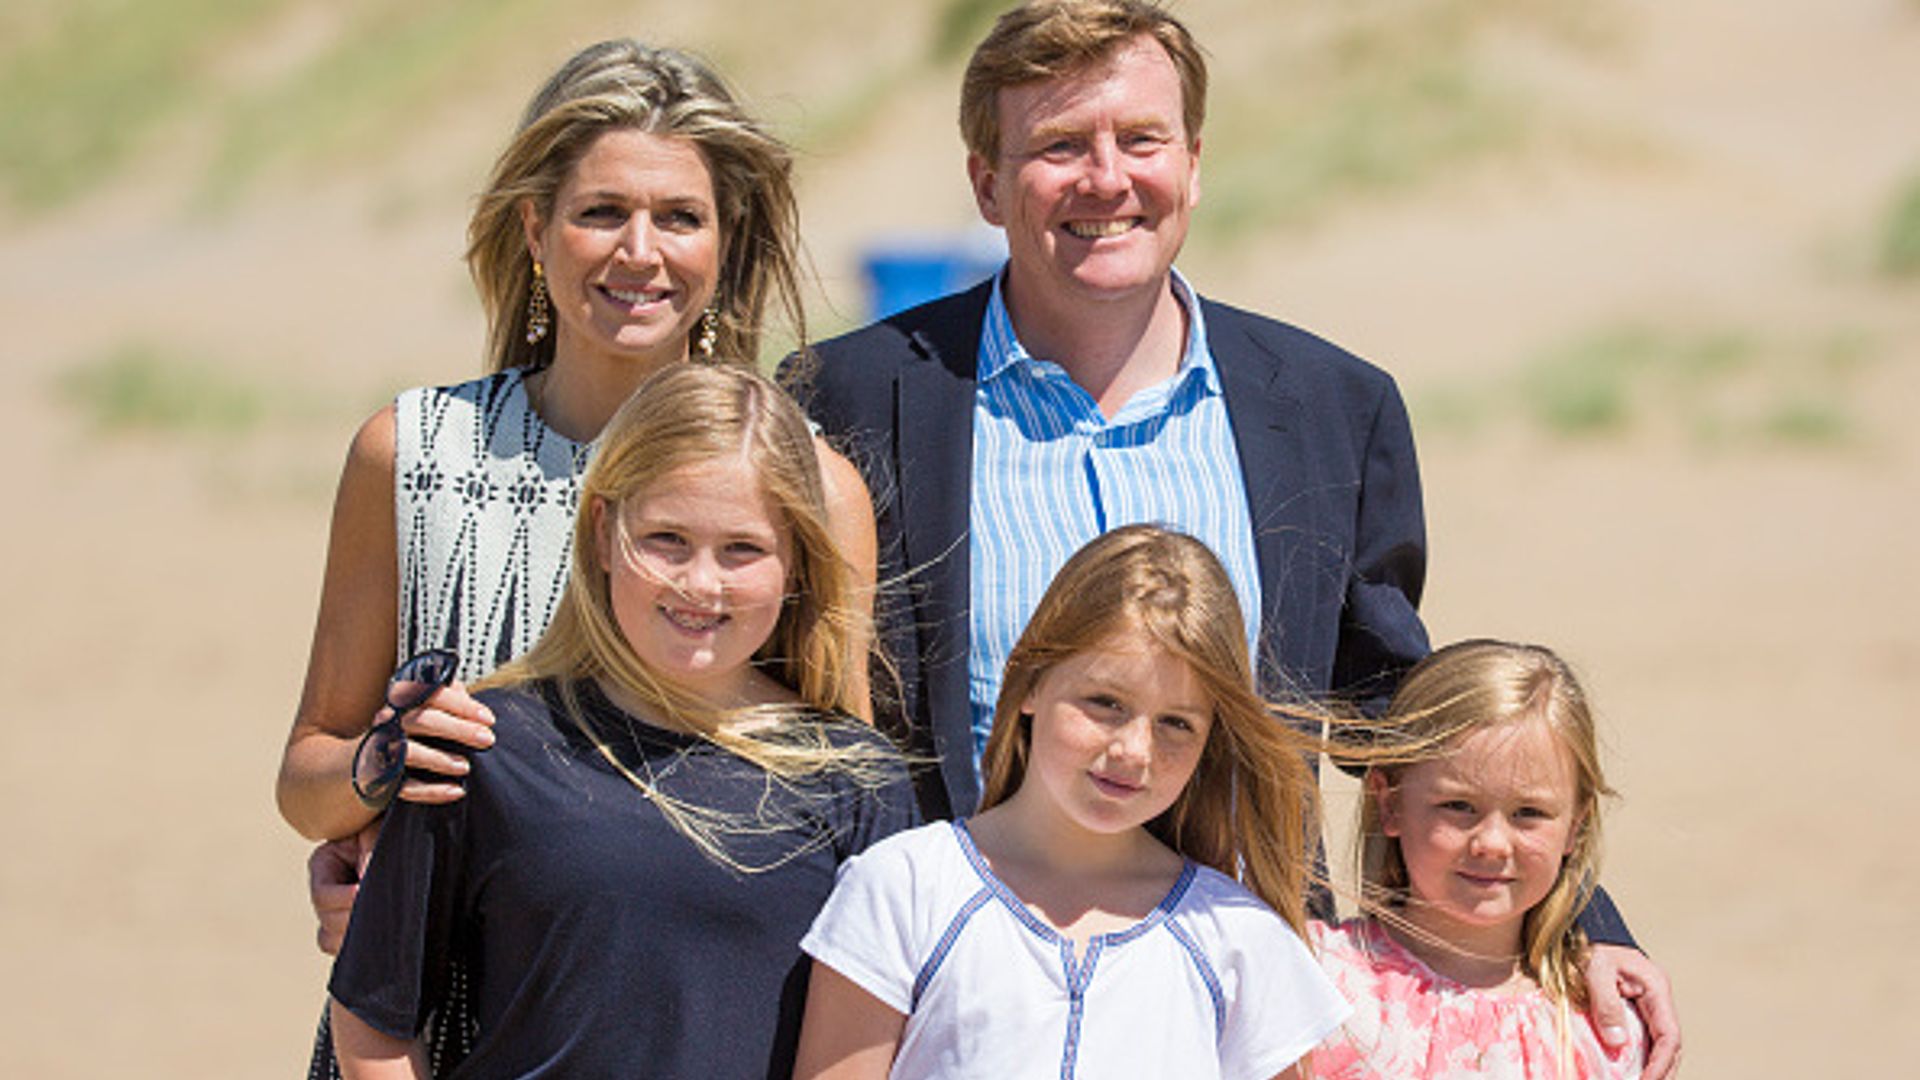 Queen Máxima, King Willem-Alexander spend day with girls on the beach